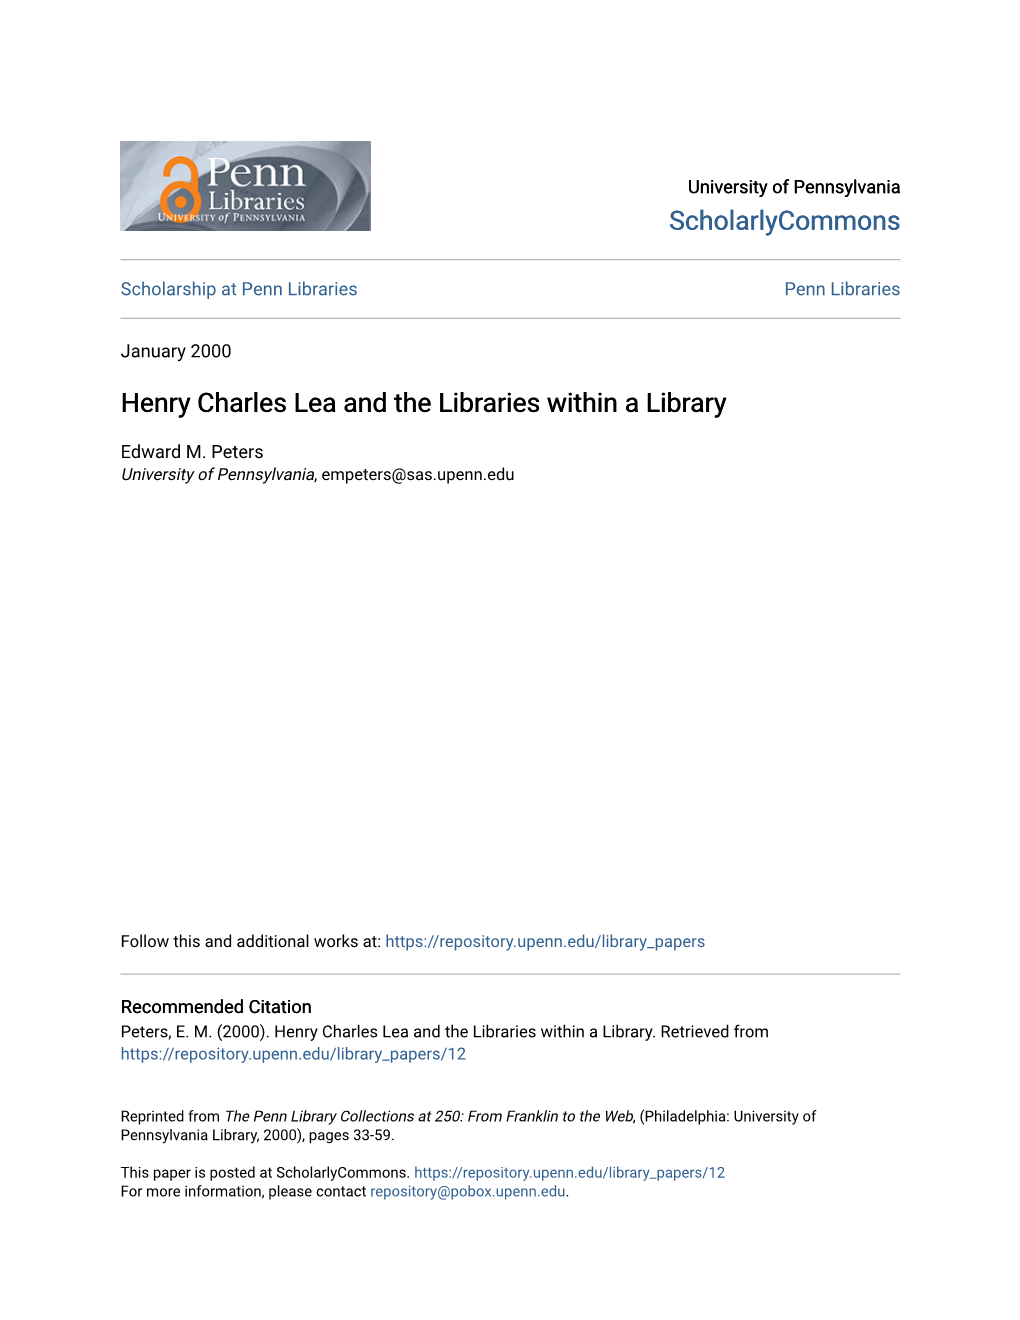 Henry Charles Lea and the Libraries Within a Library